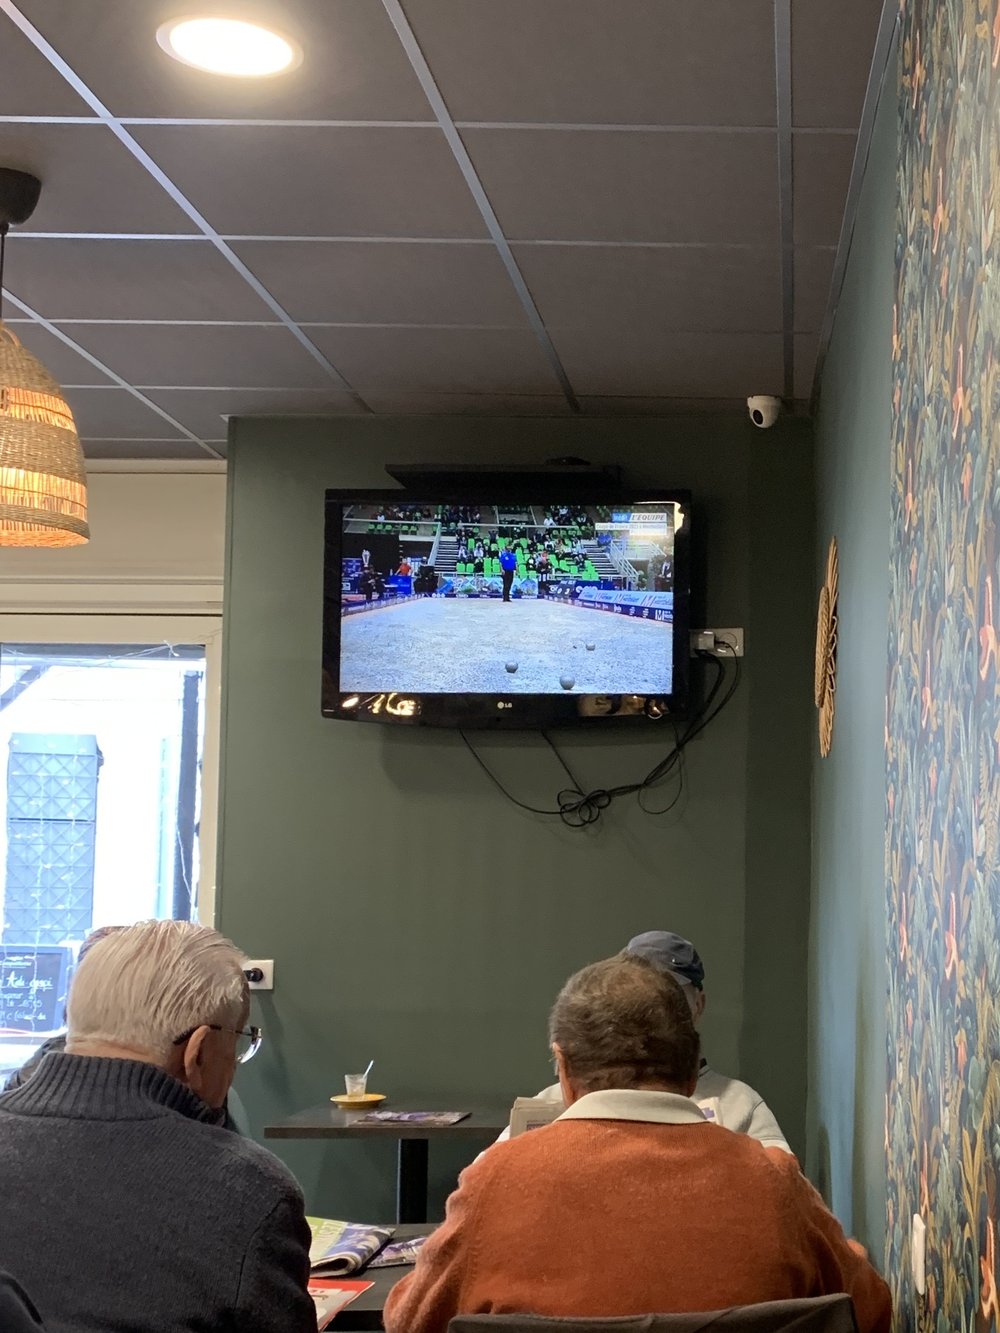 petanque on the tv!